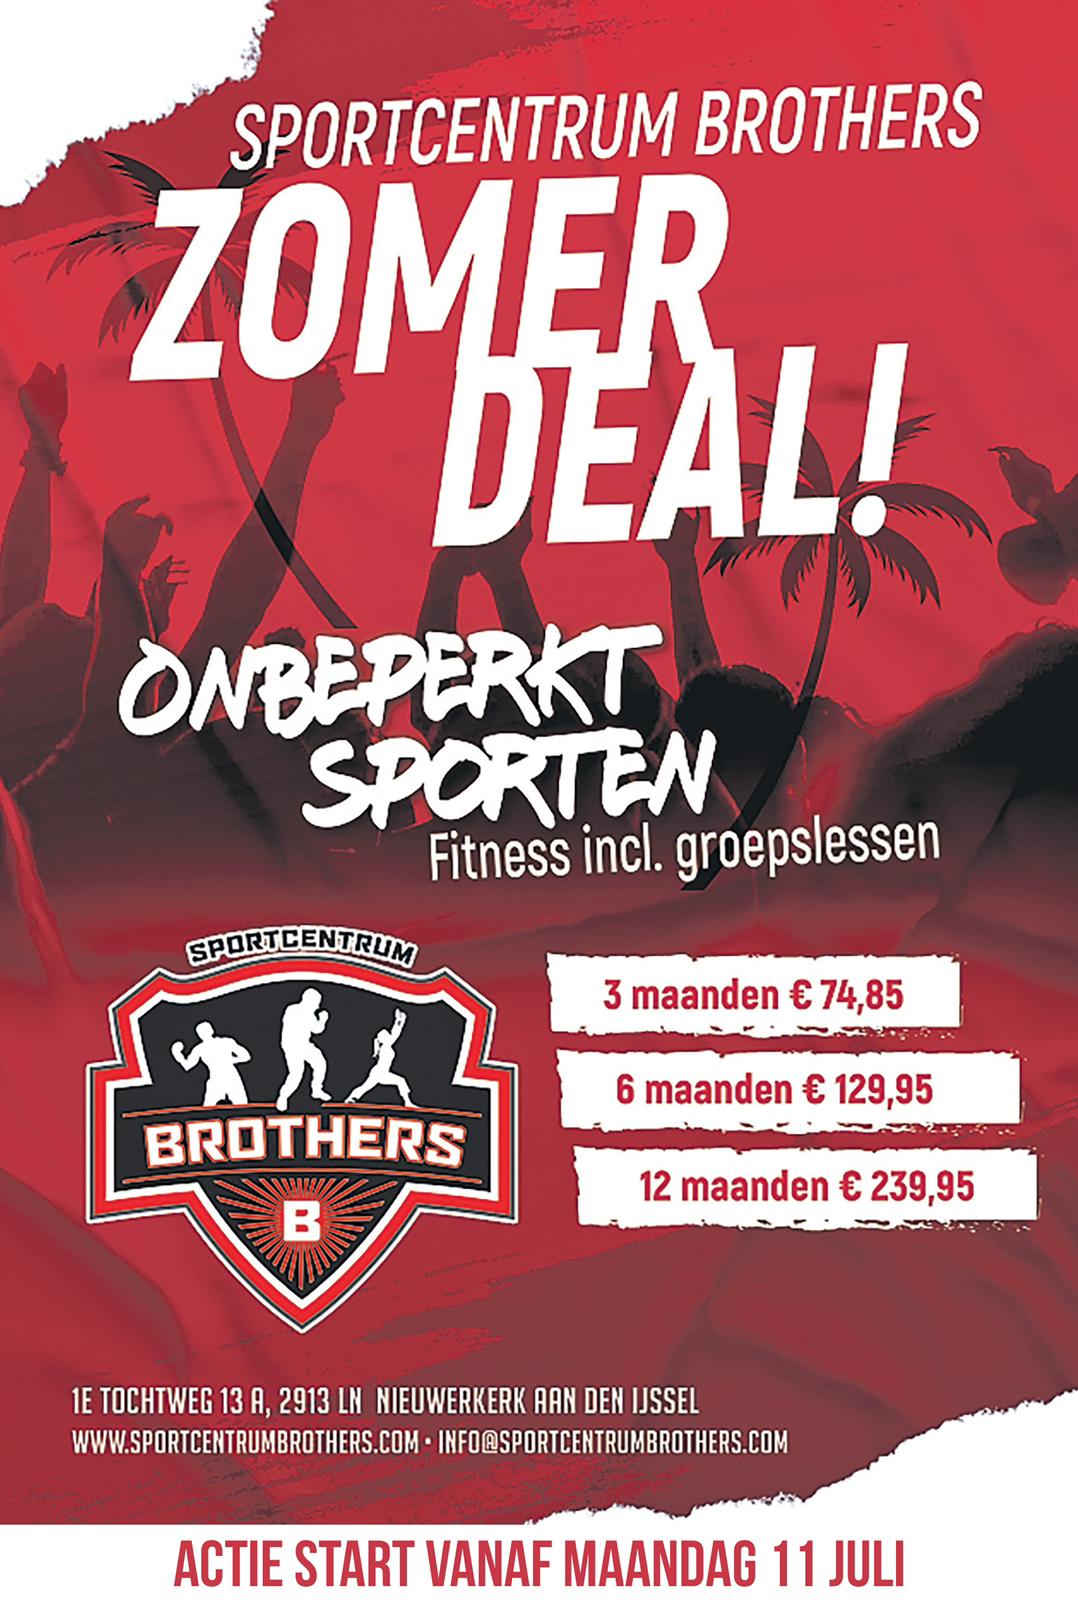 Sportcentrum Brothers Zomerdeal